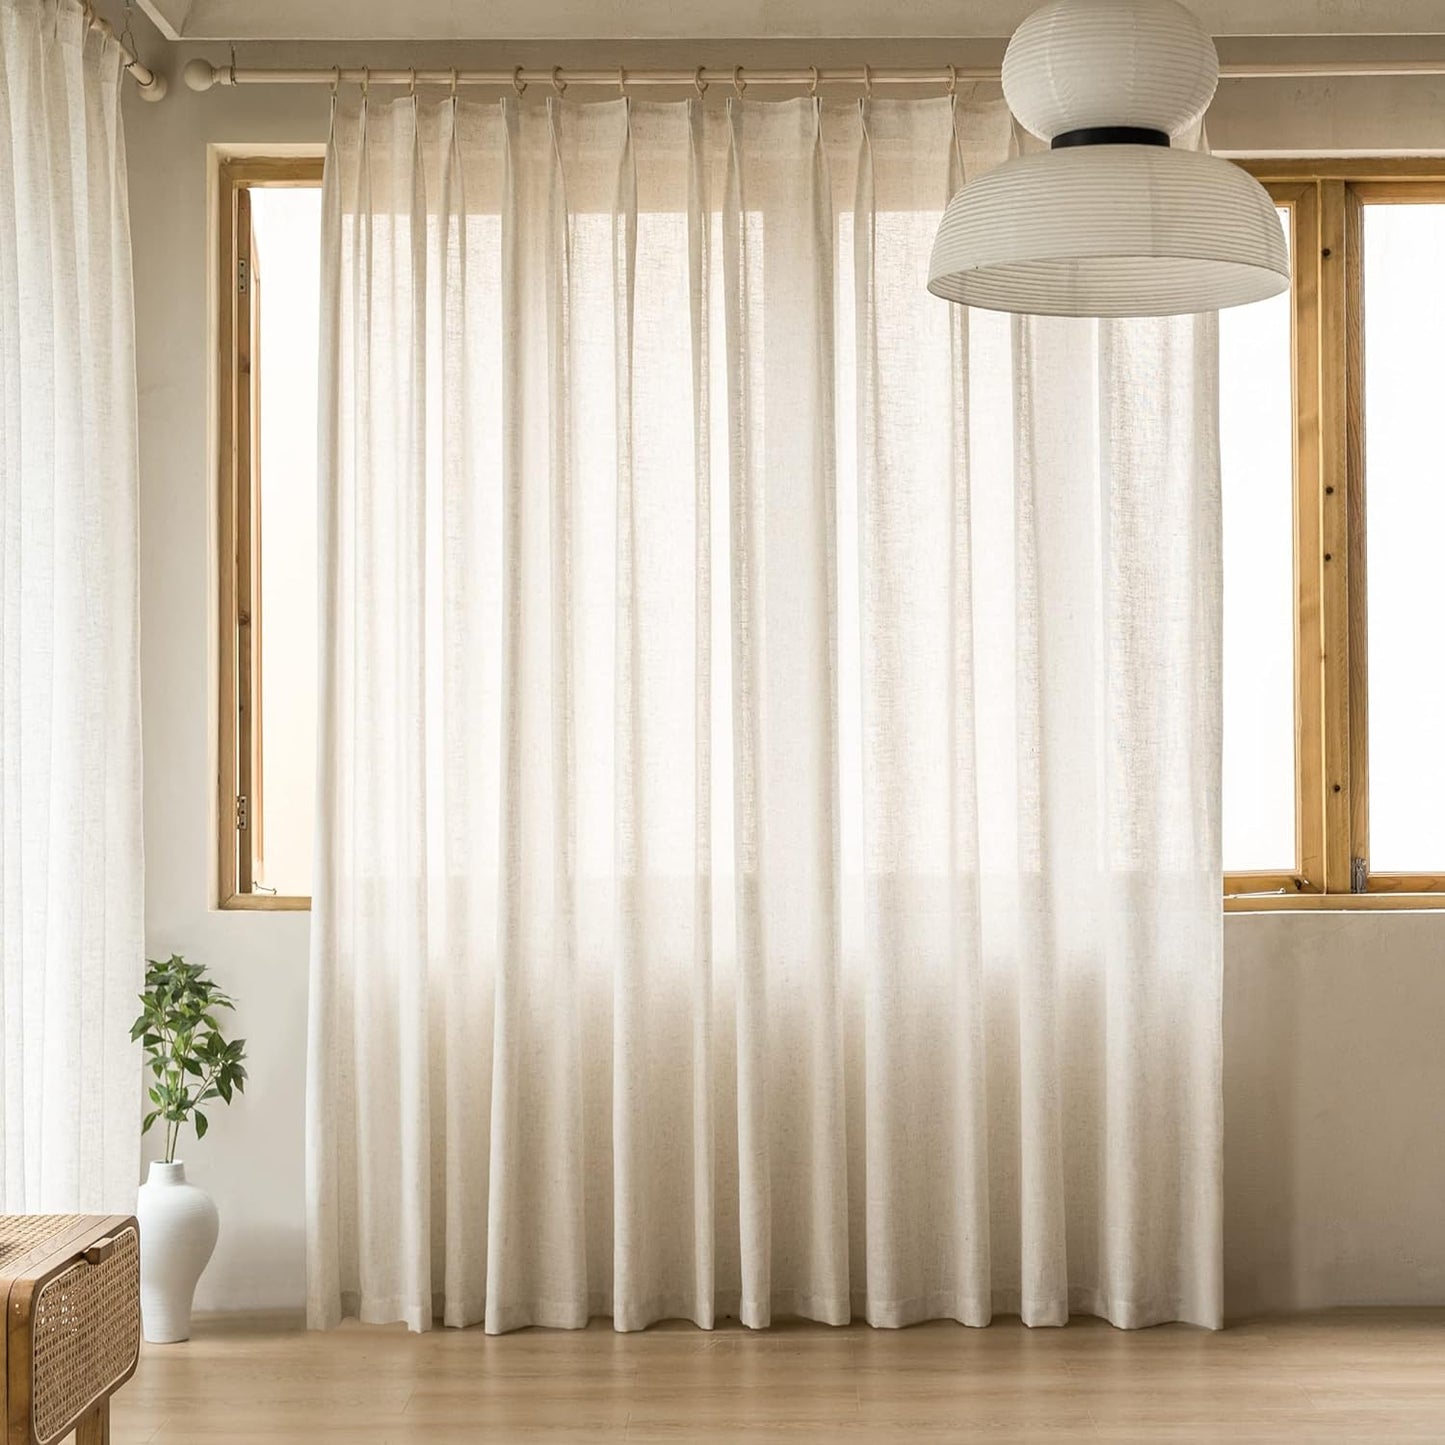 MAIHER Extra Wide Pinch Pleated Drapes 108 Inches Long, Faux Linen Light Filtering Semi Sheer Curtains with Hooks for Living Room Bedroom, Natural Linen (1 Panel, 100 W X 108 L)  MAIHER Linen 54X120 